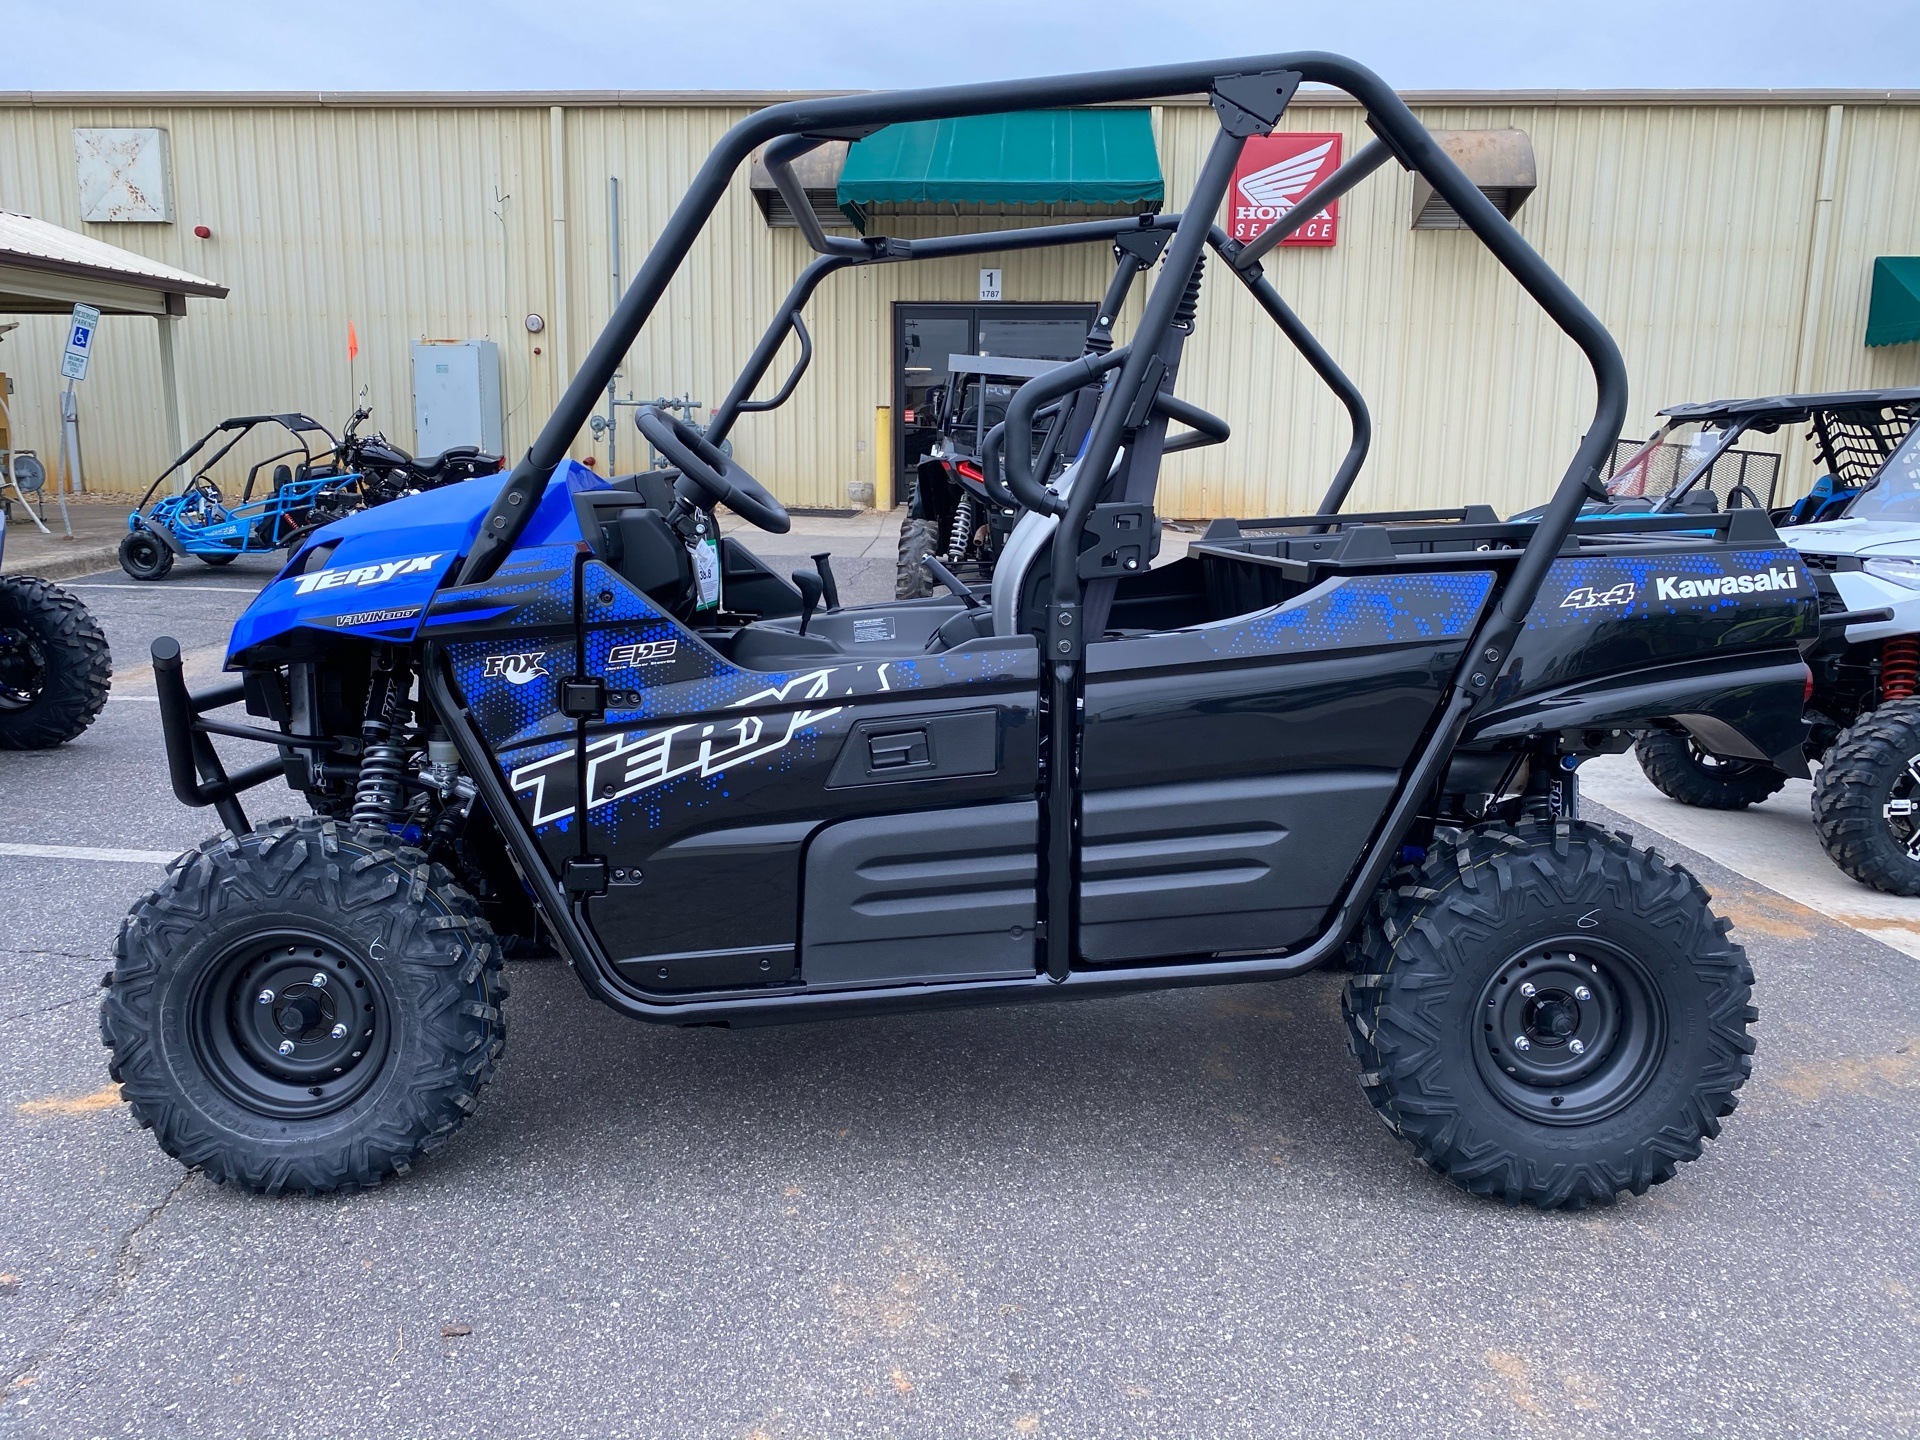 pen håndflade omdømme New 2021 Kawasaki Teryx Utility Vehicles in Statesville, NC | Stock Number:  506836 - greatwesternmotorcycles.com